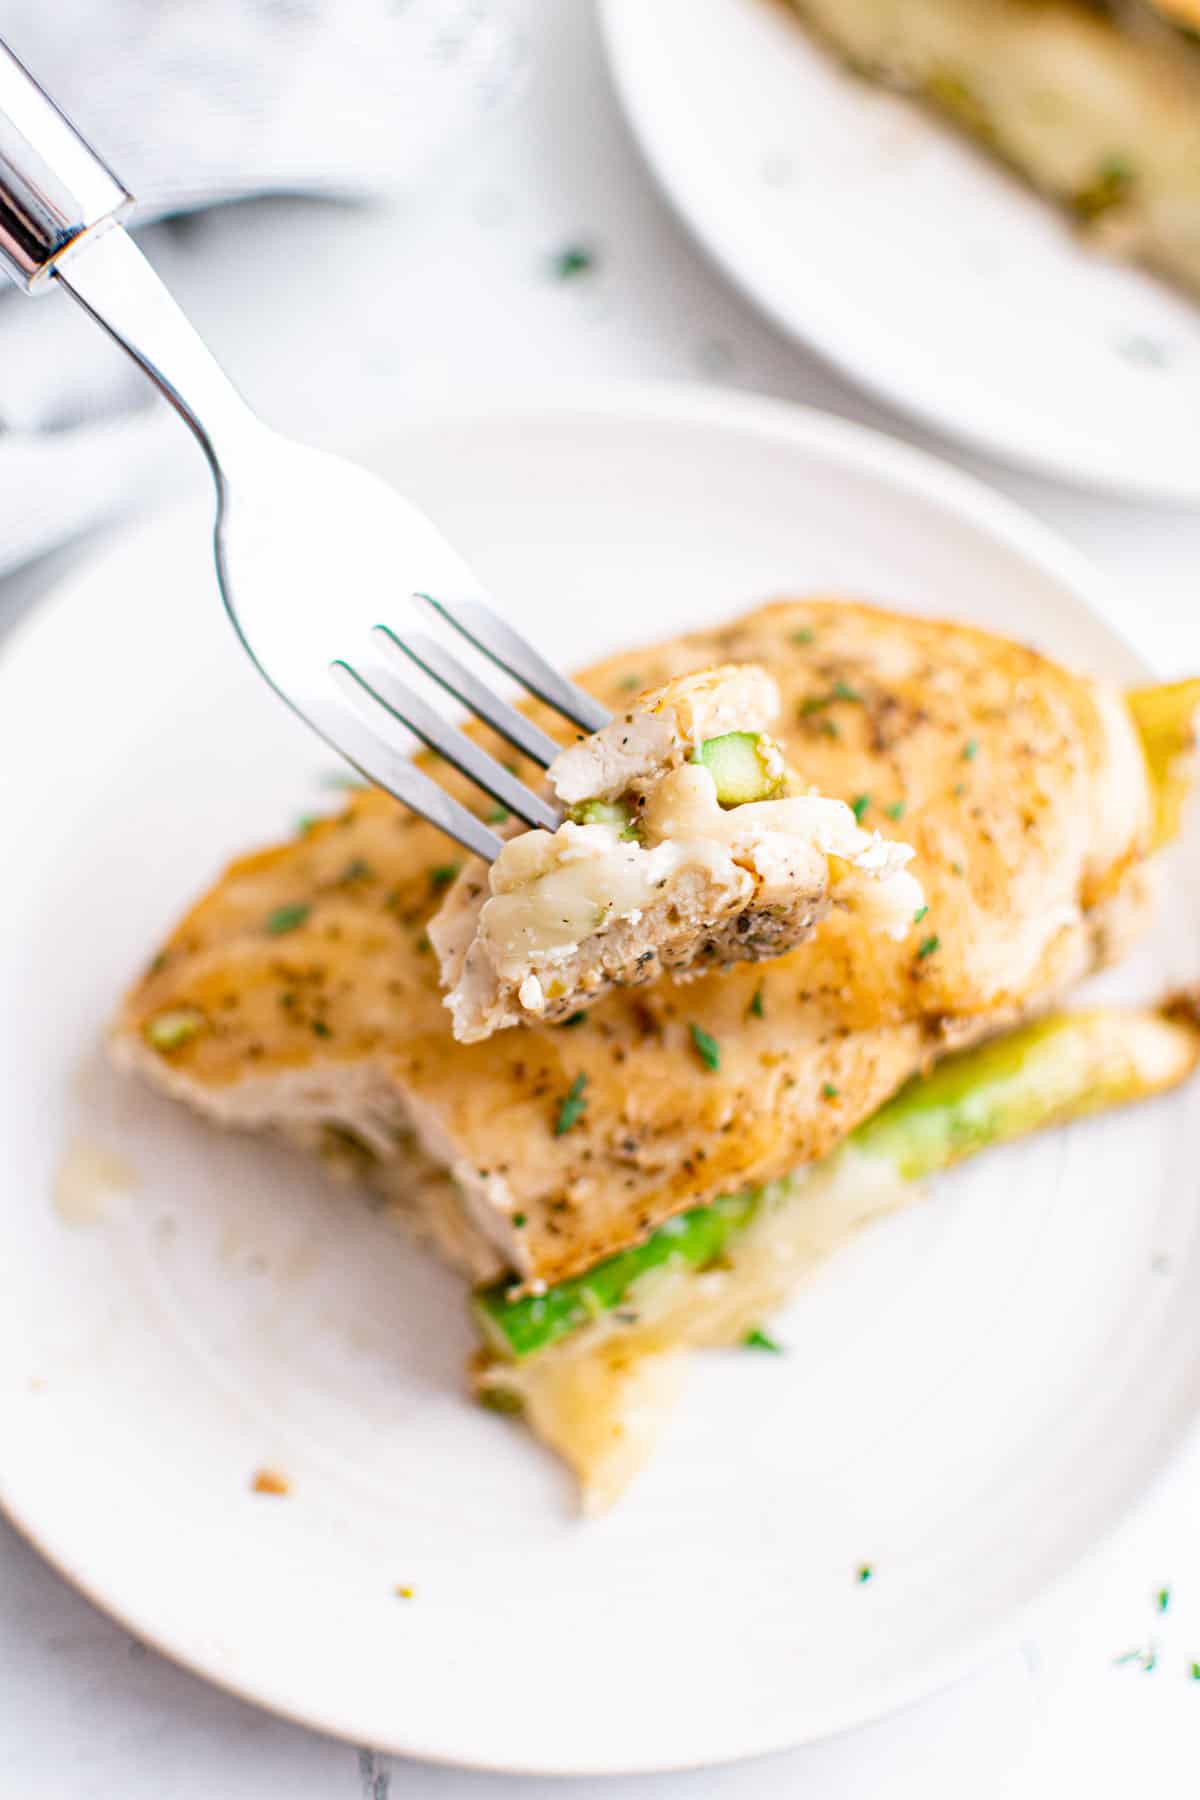 a fork removing one bite of the completed instant pot stuffed chicken breast